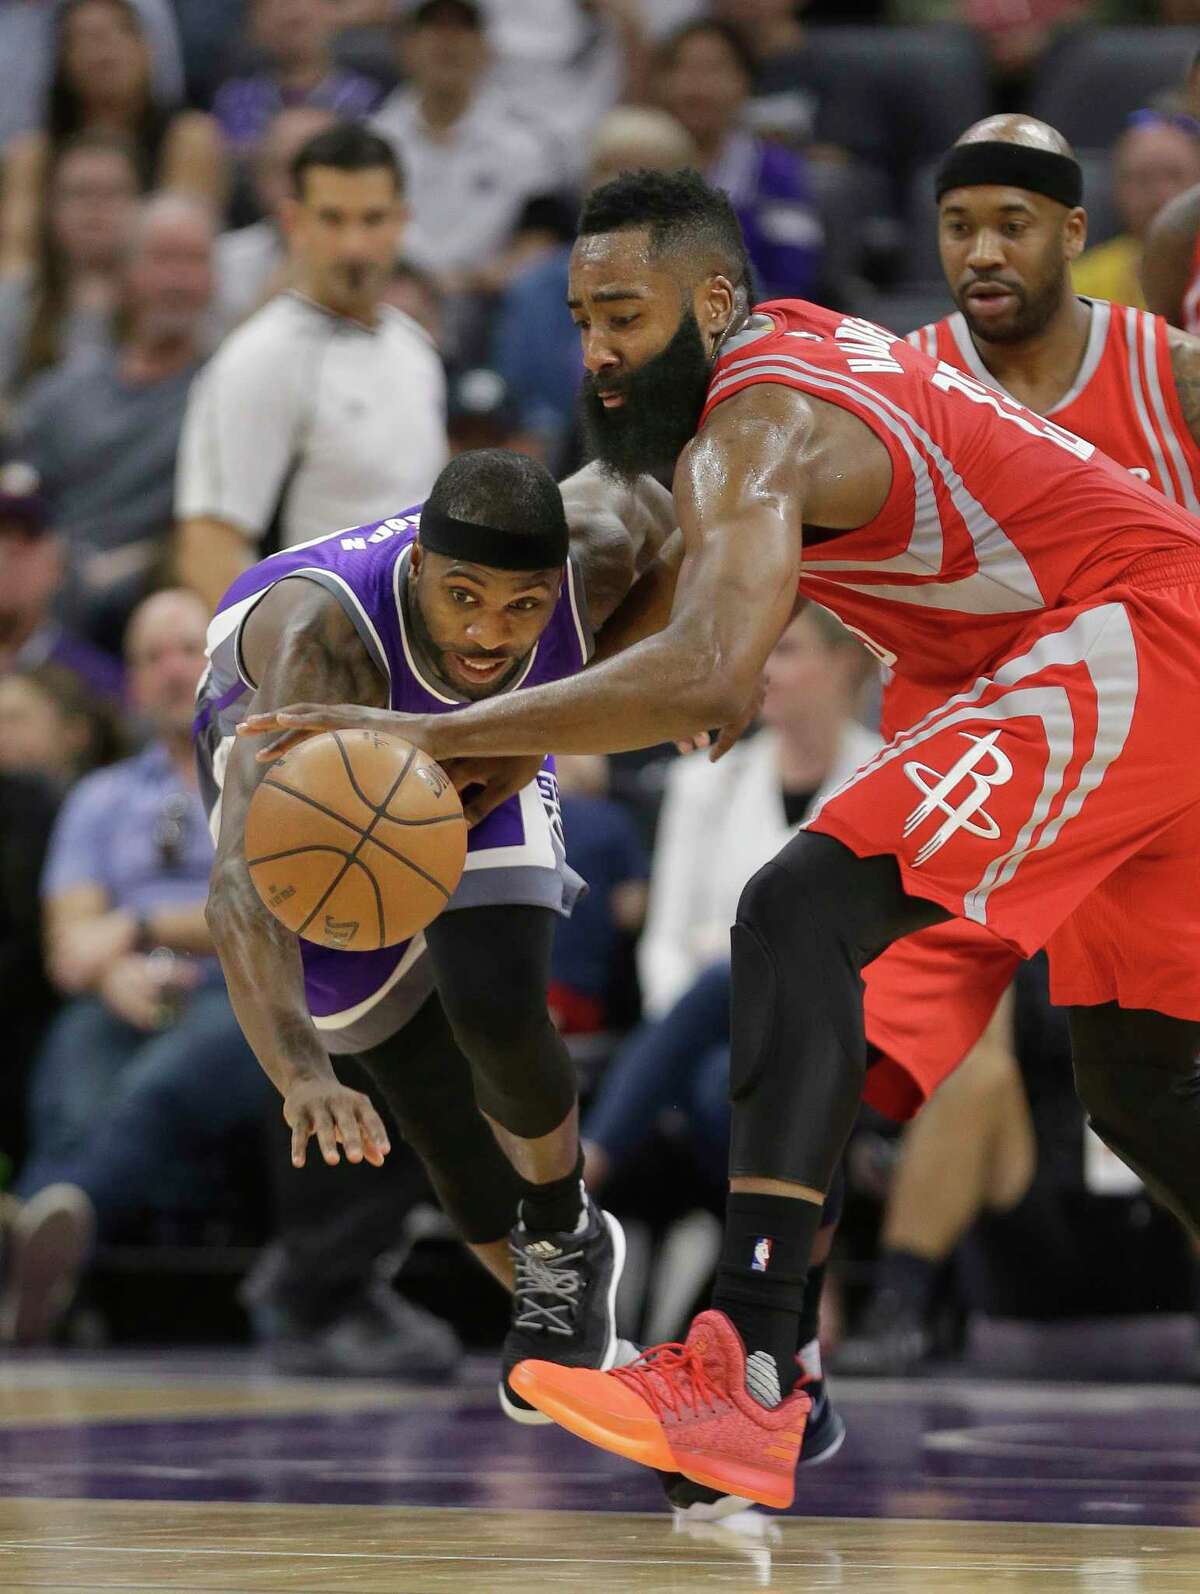 Sacramento Kings guard Ty Lawson, left, and Houston Rockets guard James Harden scramble for the ball during the first half of an NBA basketball game Sunday, April 9, 2017, in Sacramento, Calif. (AP Photo/Rich Pedroncelli)